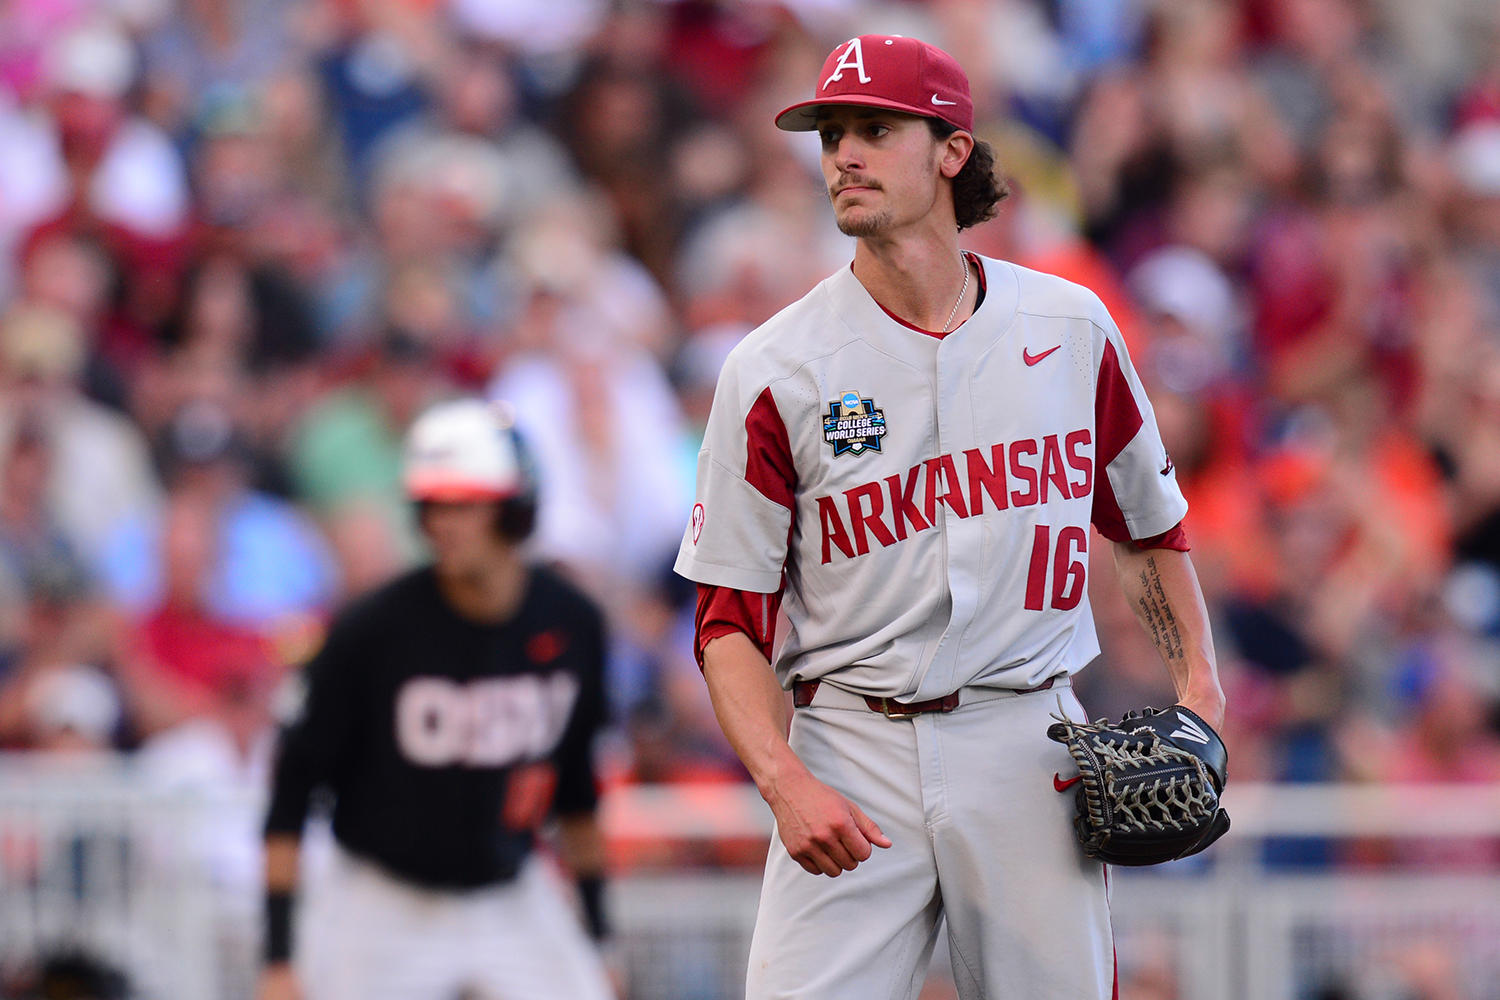 After Game 1 Win, Arkansas Razorbacks Head Into What Could Be Decisive